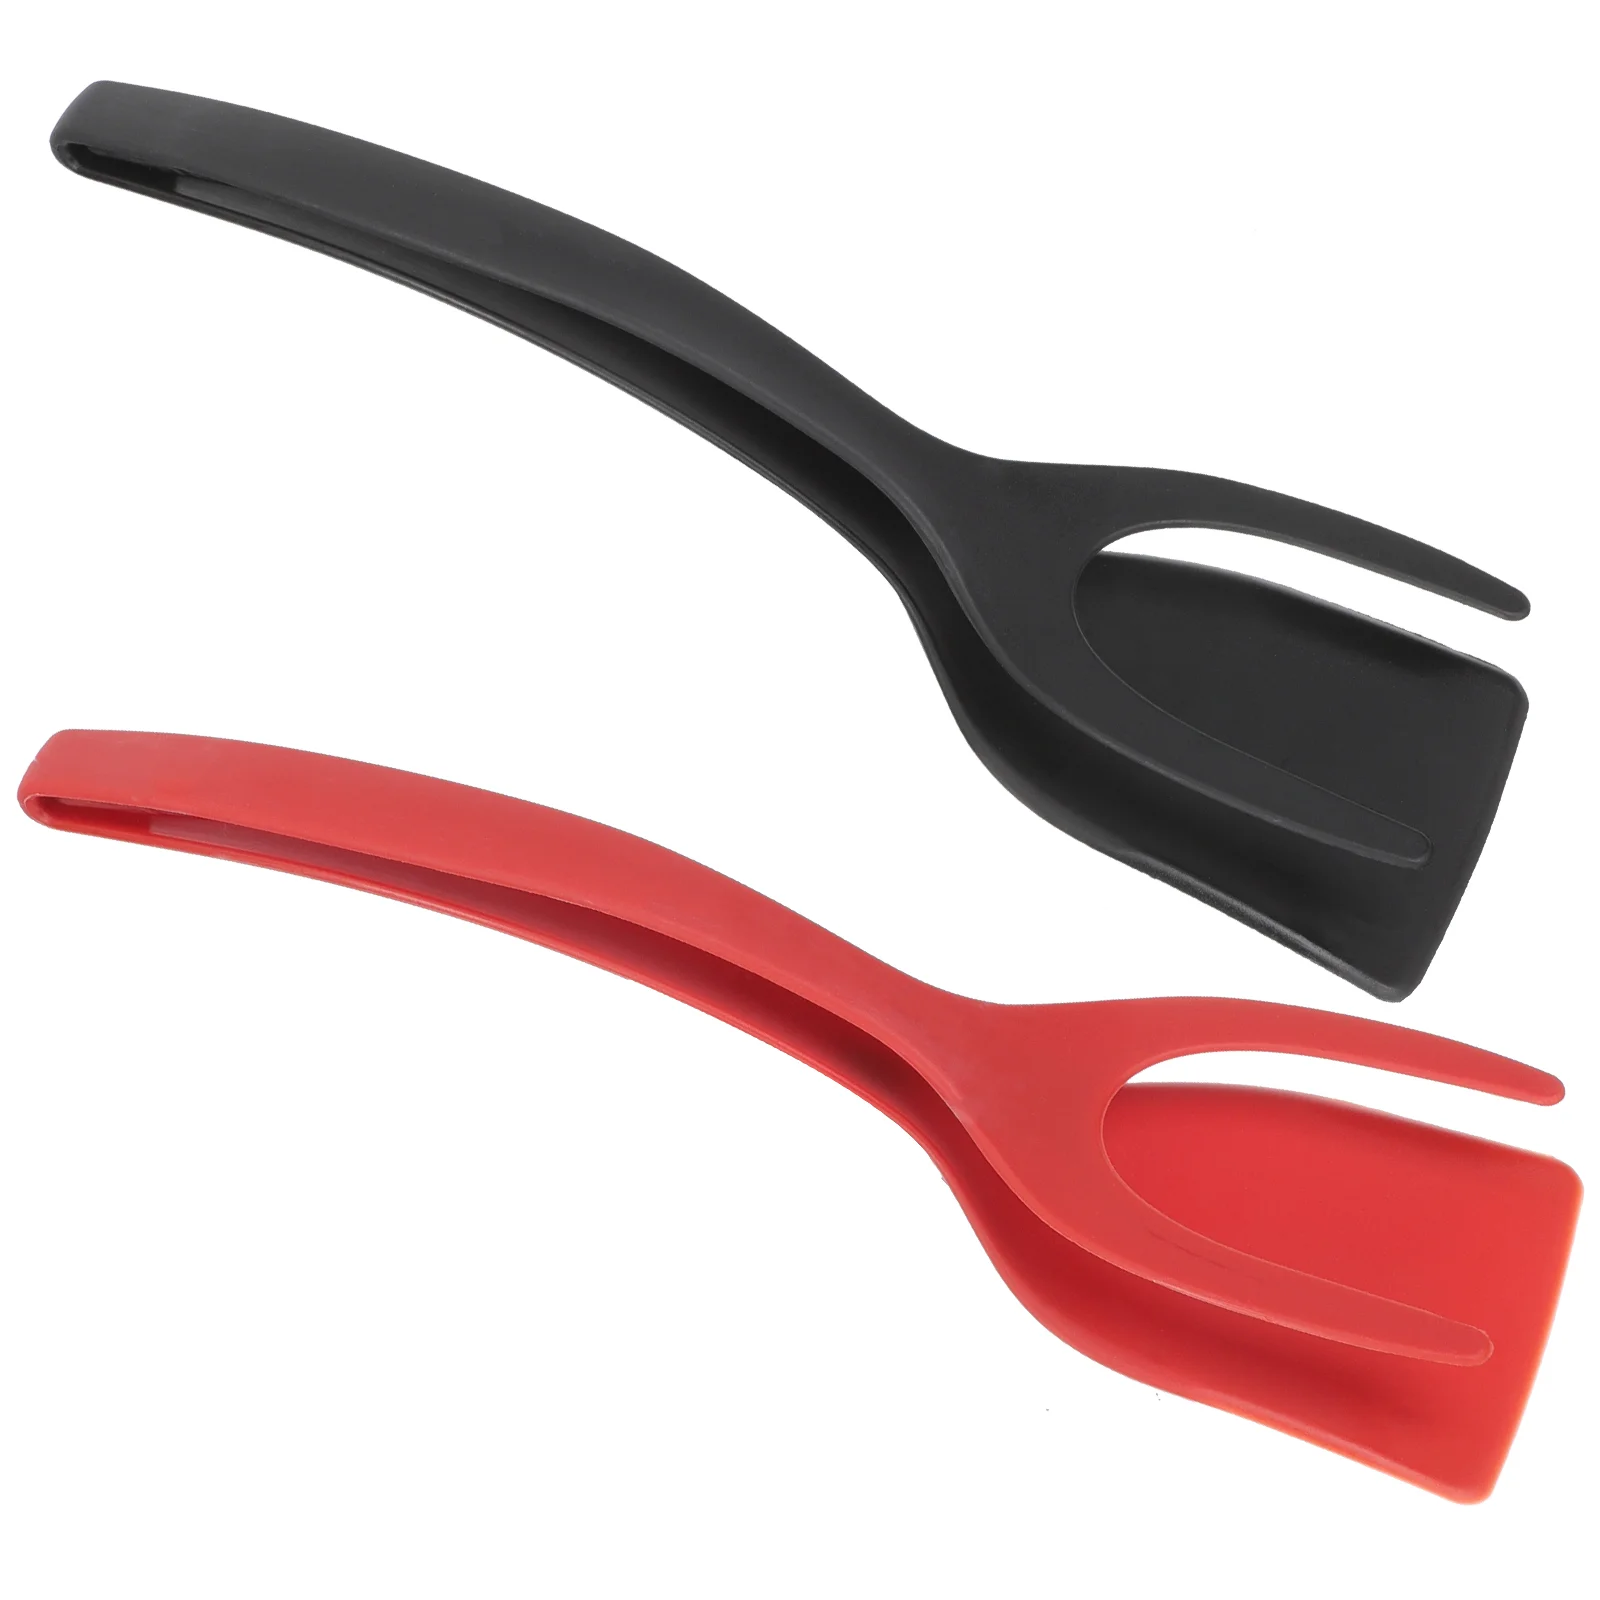 

2 Pcs Silicone Egg Spatula Practical Tool Steak Clamp Tongs Cooking Fried Kitchen Tools Silica Gel Flipping